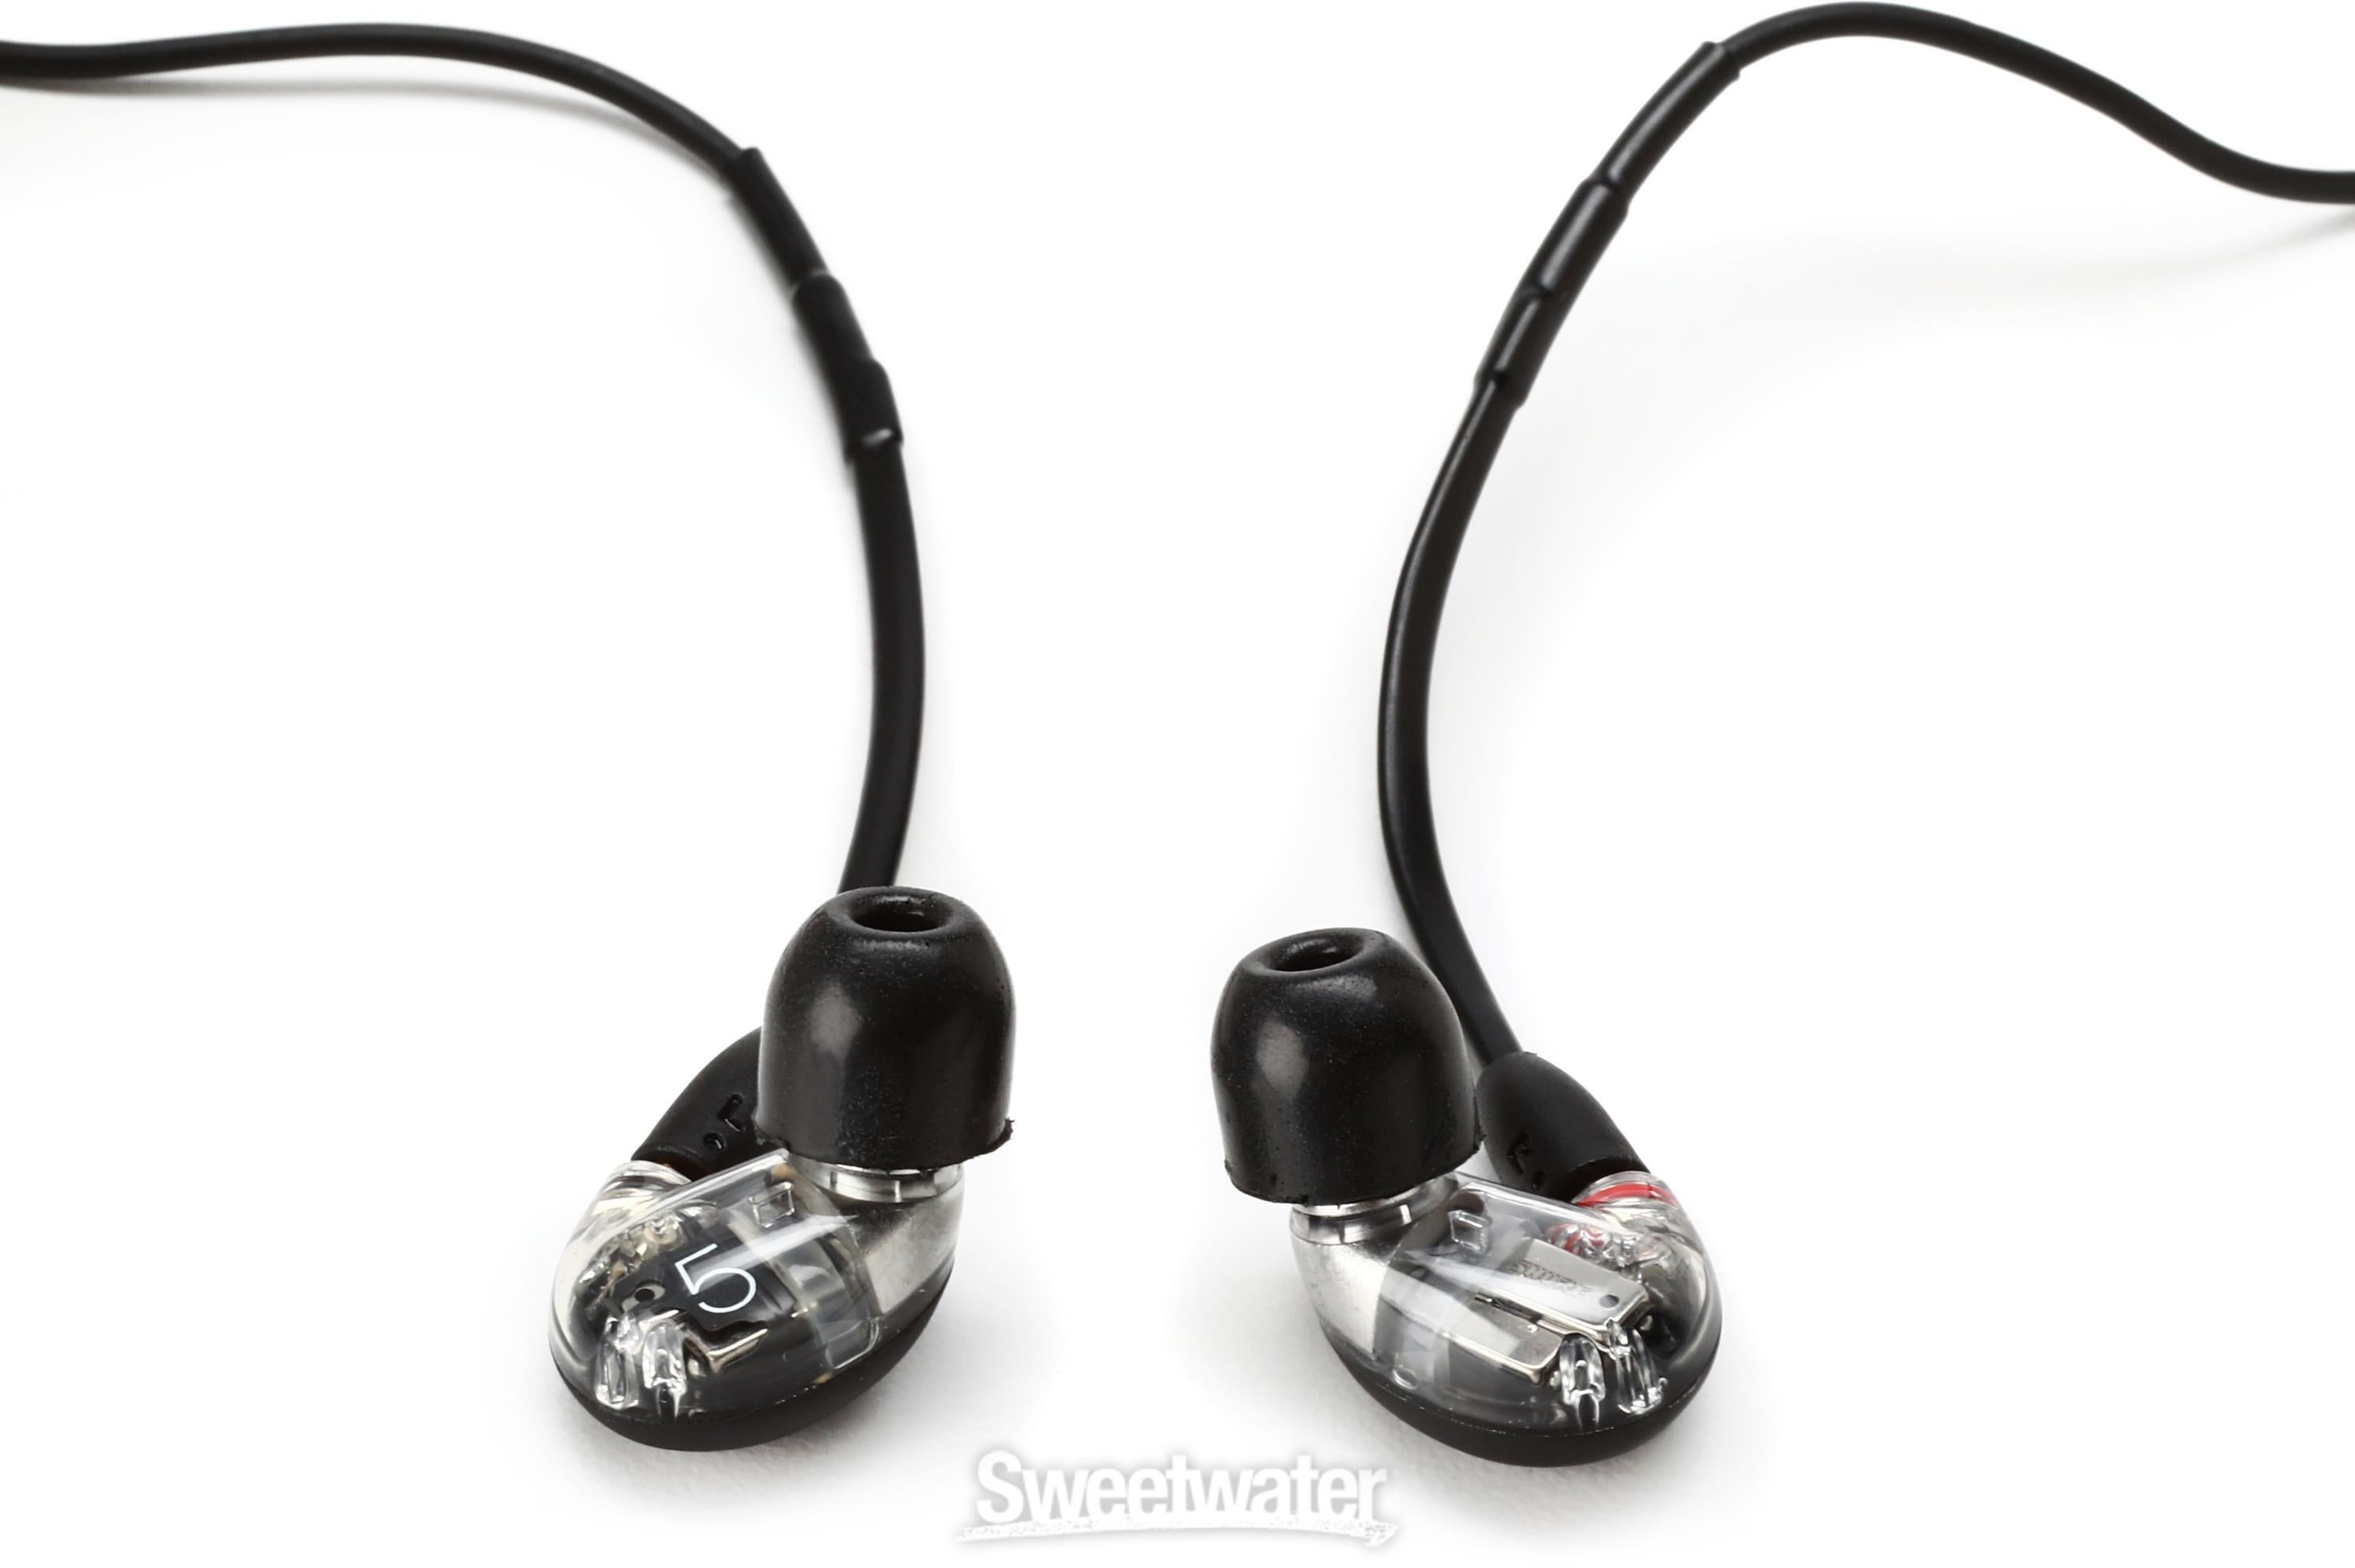 Shure AONIC 5 Sound Isolating Earphones - Black | Sweetwater